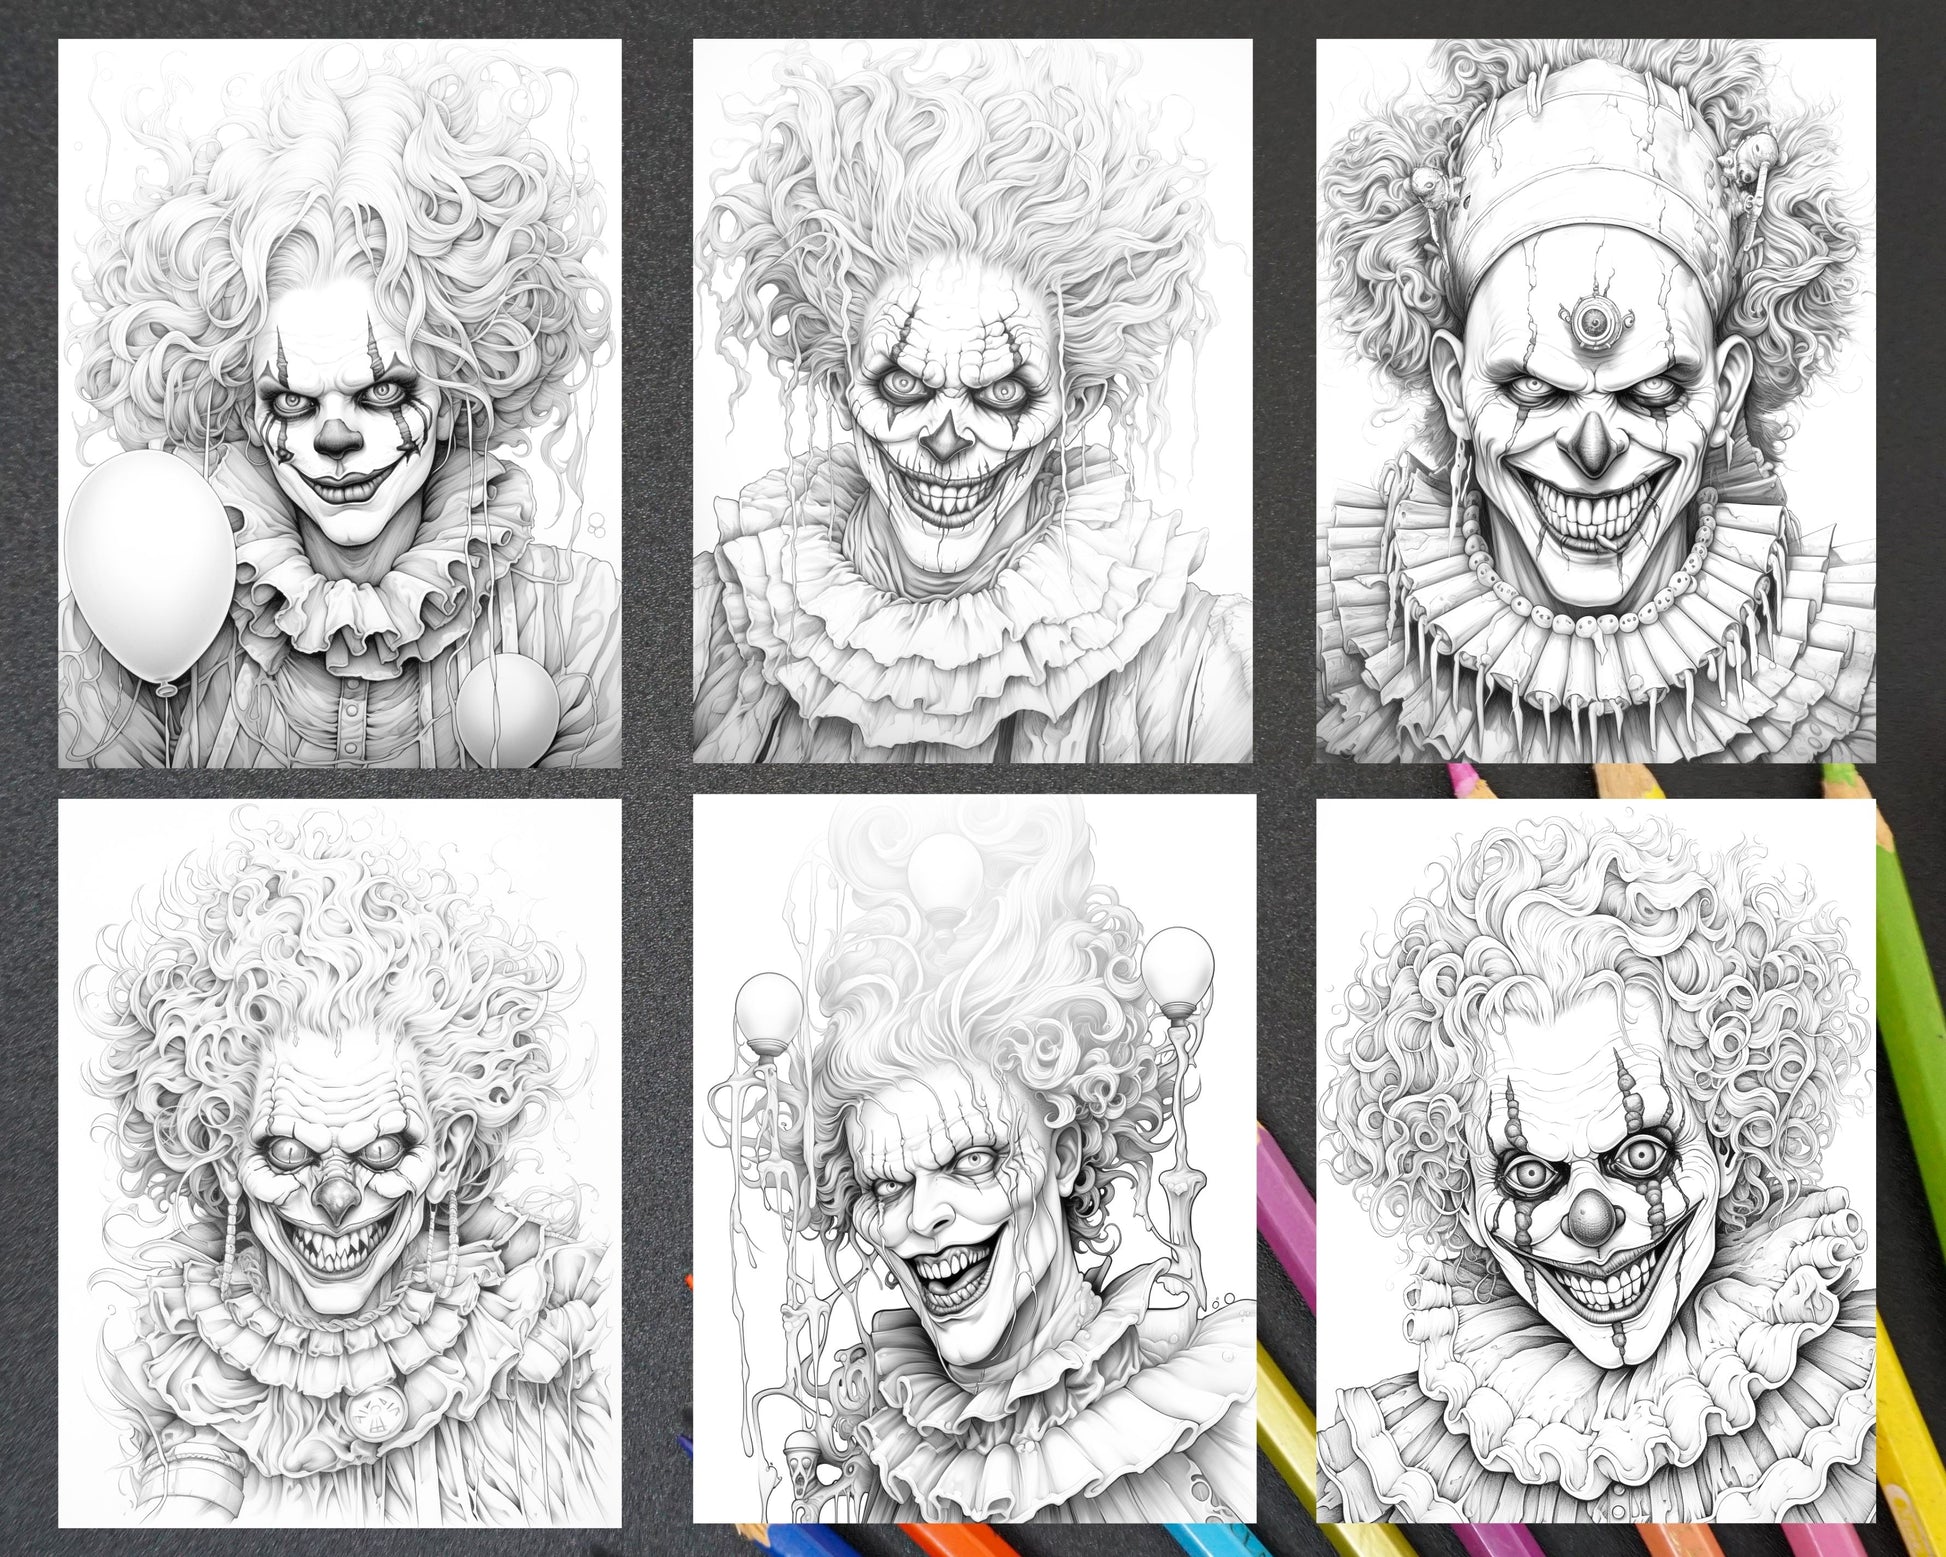 Spooky clowns grayscale coloring pages printable for adults pdf fi â coloring